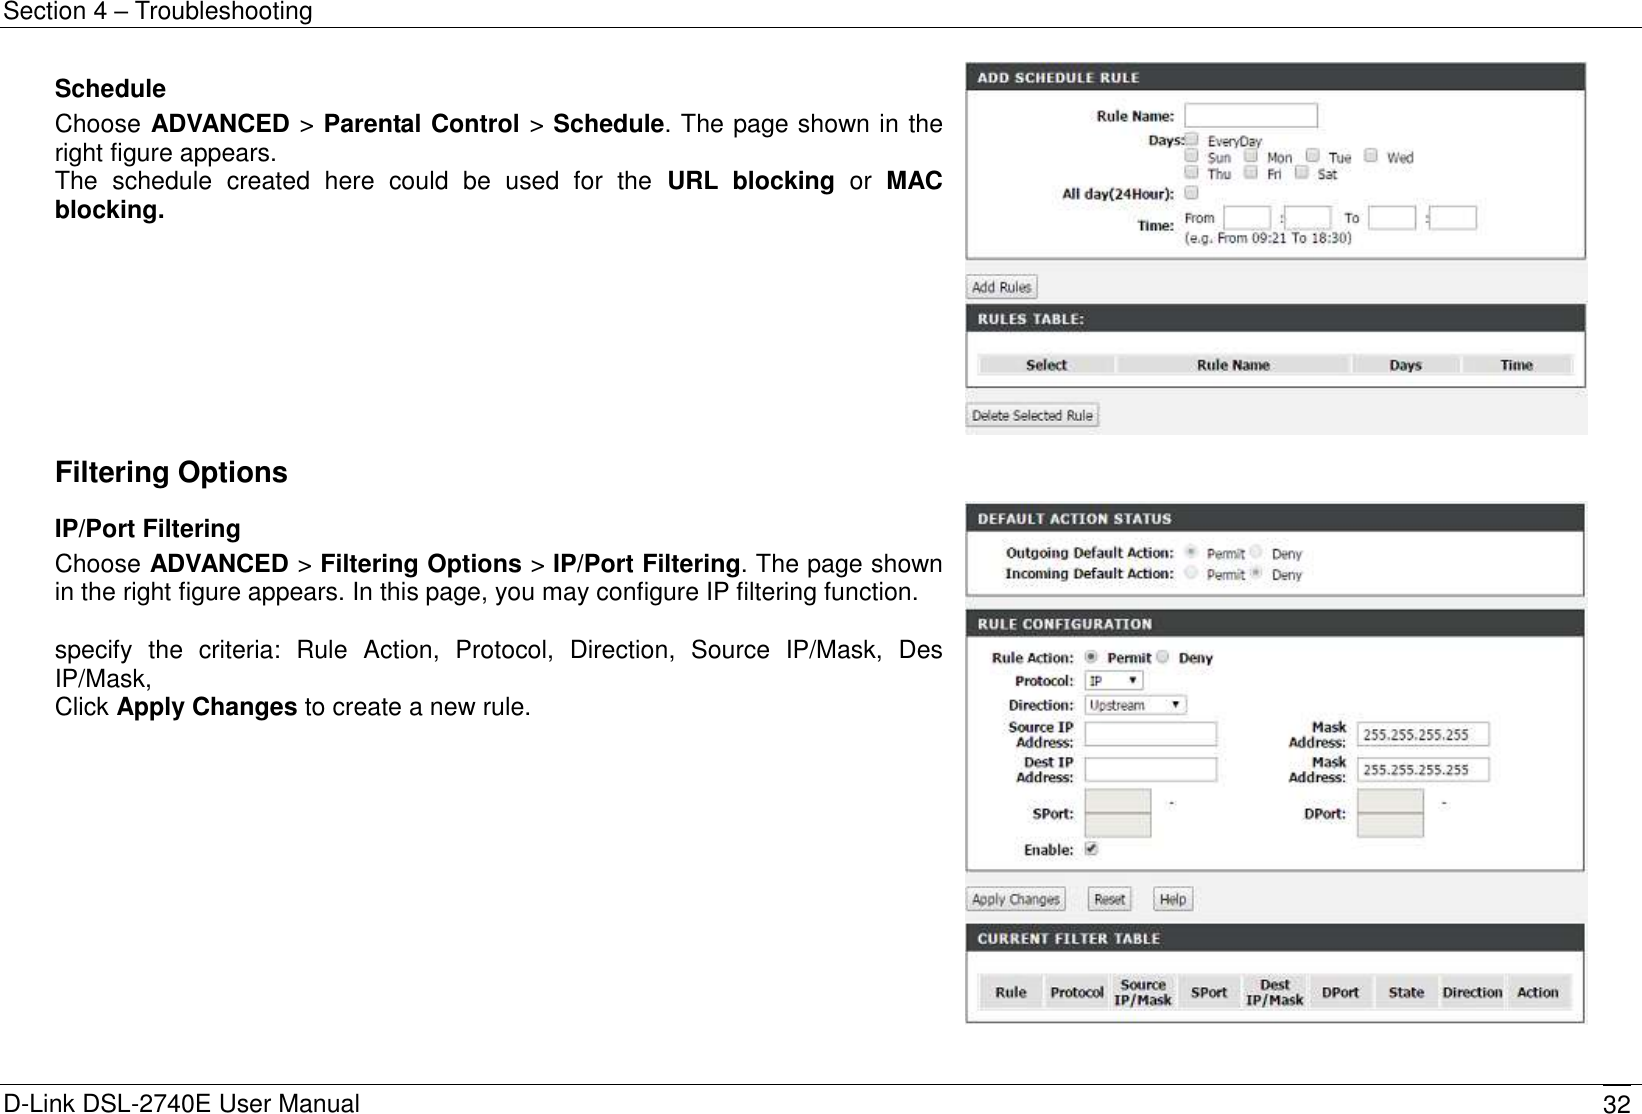 Section 4 – Troubleshooting D-Link DSL-2740E User Manual 32 Schedule Choose ADVANCED &gt; Parental Control &gt; Schedule. The page shown in the right figure appears. The  schedule  created  here  could  be  used  for  the  URL  blocking  or  MAC blocking.   Filtering Options  IP/Port Filtering Choose ADVANCED &gt; Filtering Options &gt; IP/Port Filtering. The page shown in the right figure appears. In this page, you may configure IP filtering function.  specify  the  criteria:  Rule  Action,  Protocol,  Direction,  Source  IP/Mask,  Des IP/Mask,   Click Apply Changes to create a new rule.   